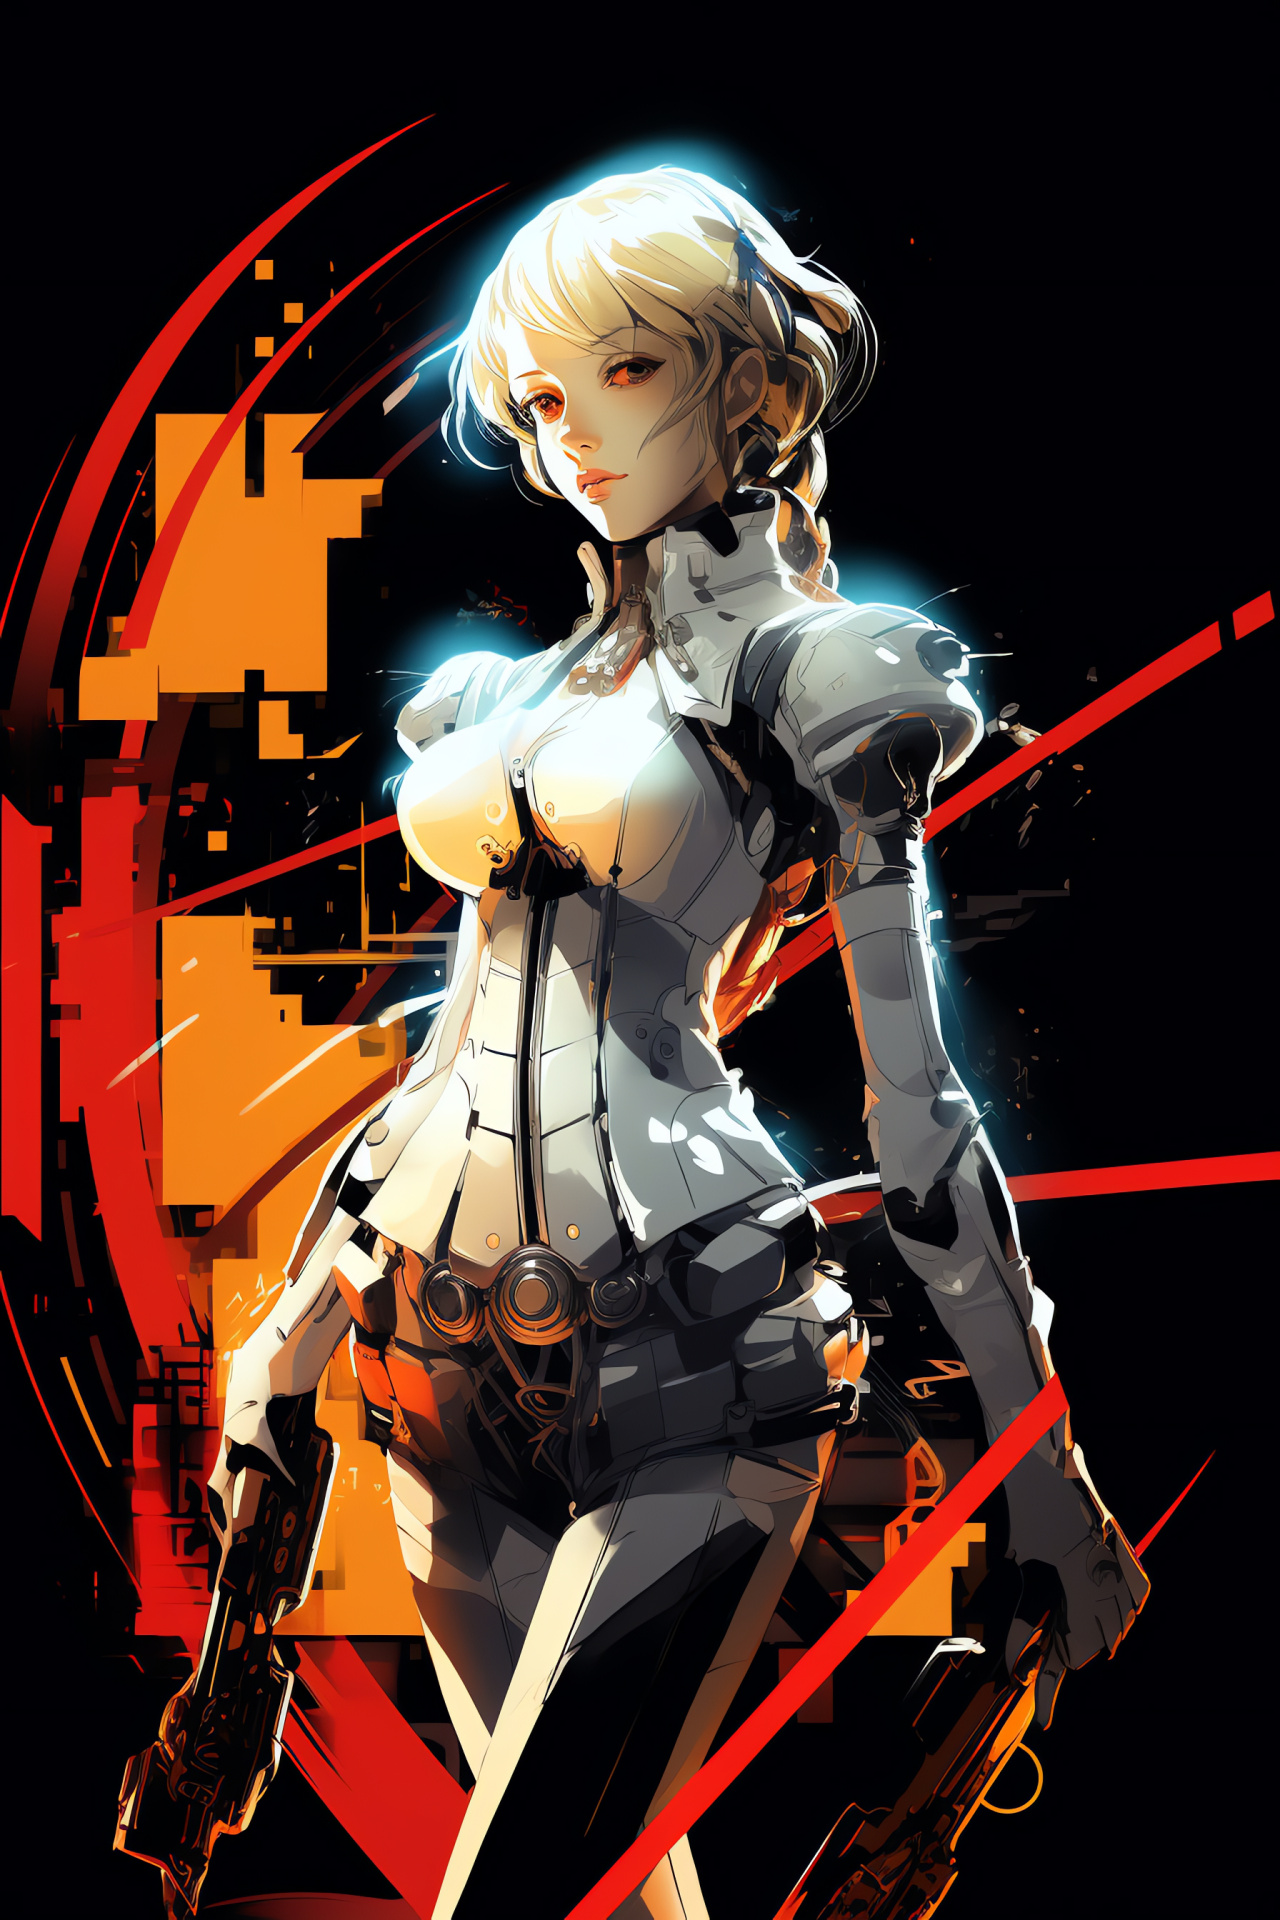 Aigis, Persona 3 protagonist, Mechanical humanoid, Role-playing battle, Fiery spirit, HD Phone Wallpaper